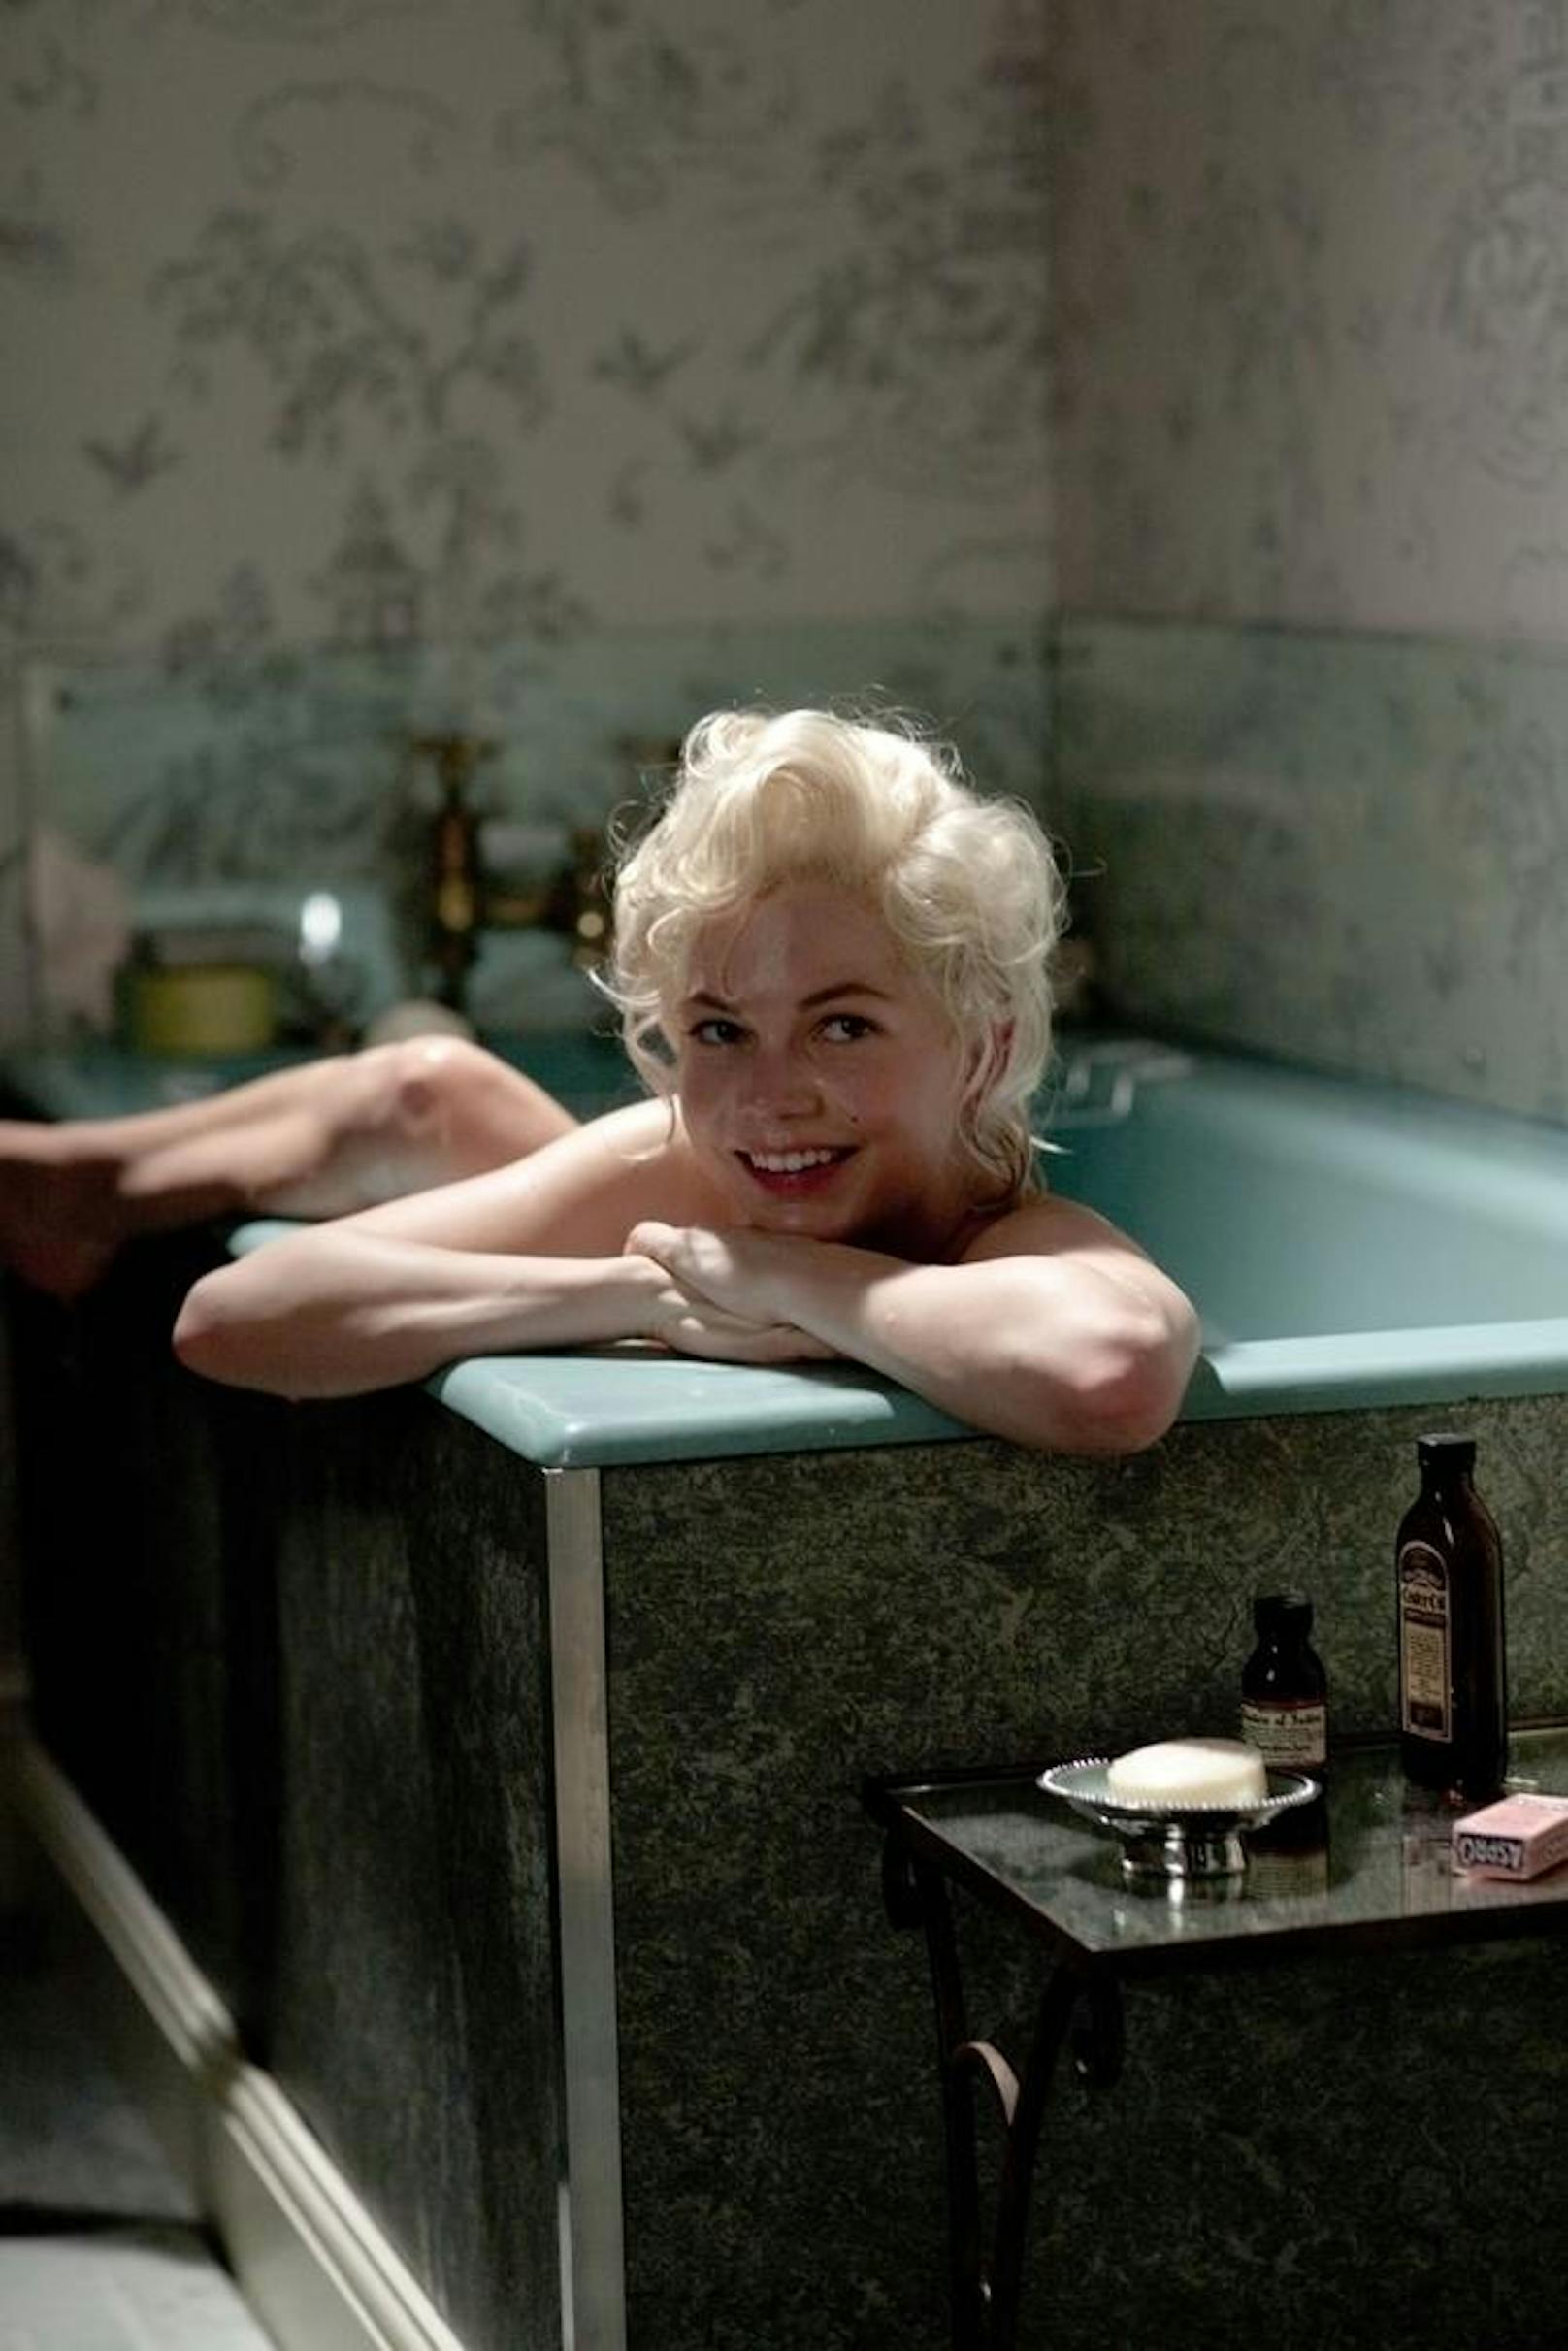 MICHELLE WILLIAMS in MY WEEK WITH MARILYN